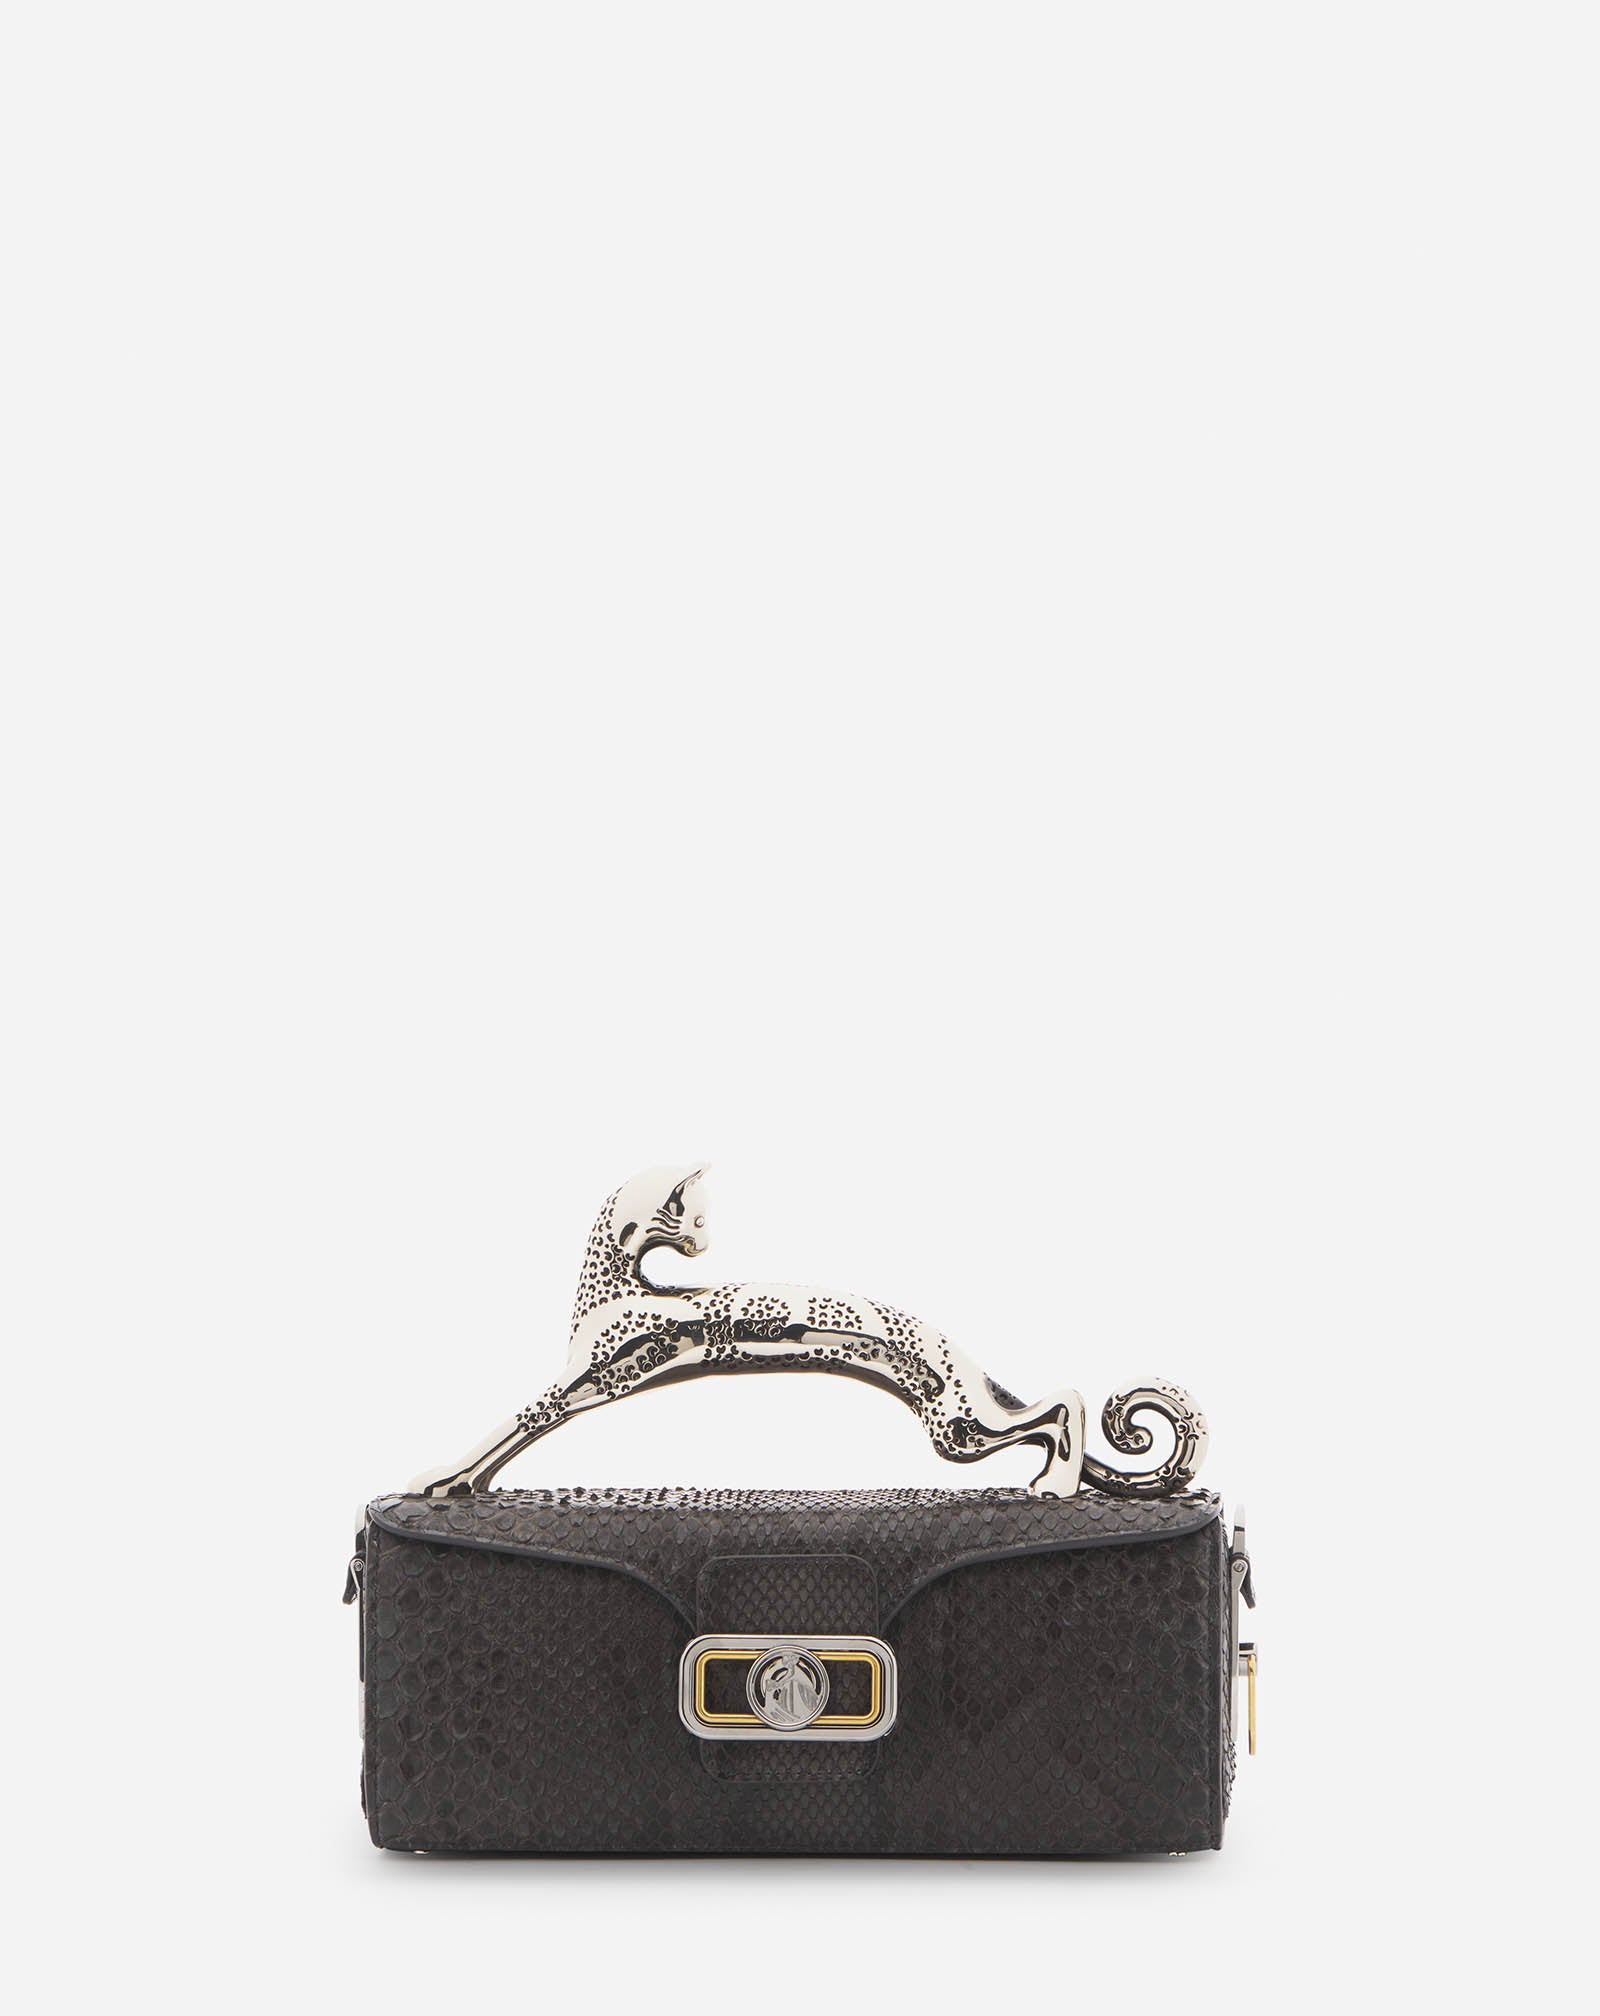 MM PENCIL CAT BAG IN PYTHON, 